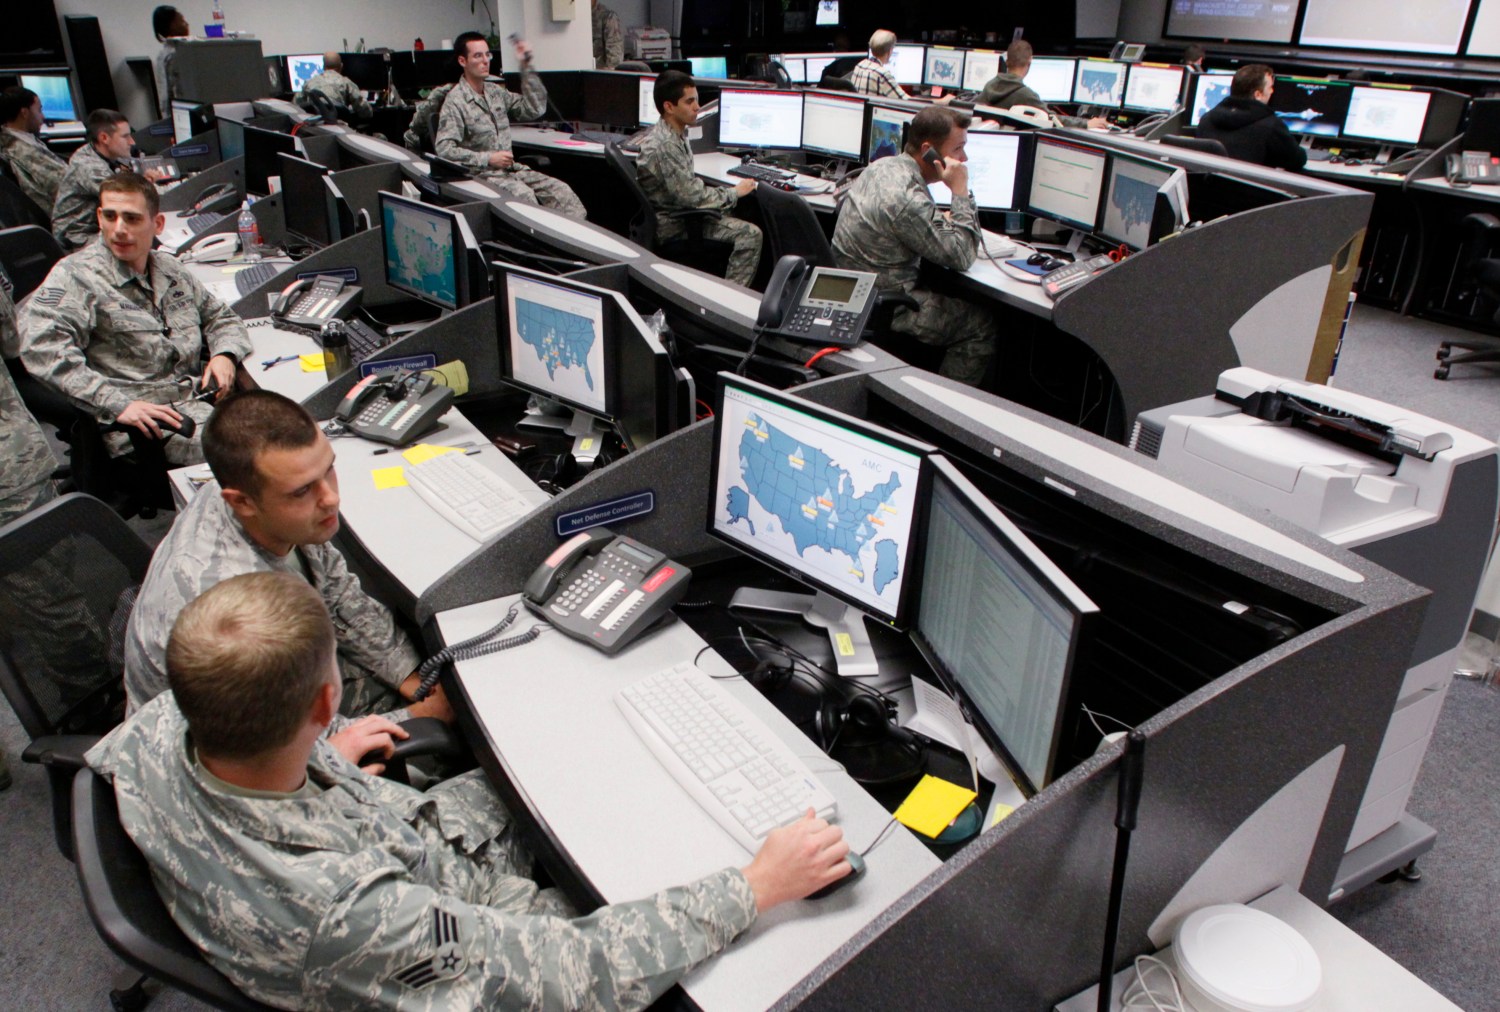 Personnel work at the Air Force Space Command Network Operations & Security Center at Peterson Air Force Base in Colorado Springs, Colorado July 20, 2010. U.S. national security planners are proposing that the 21st century's critical infrastructure -- power grids, communications, water utilities, financial networks -- be similarly shielded from cyber marauders and other foes. The ramparts would be virtual, their perimeters policed by the Pentagon and backed by digital weapons capable of circling the globe in milliseconds to knock out targets.  To match Special Report  USA-CYBERWAR/          REUTERS/Rick Wilking (UNITED STATES - Tags: MILITARY SCI TECH POLITICS) - GM1E6A51SA301